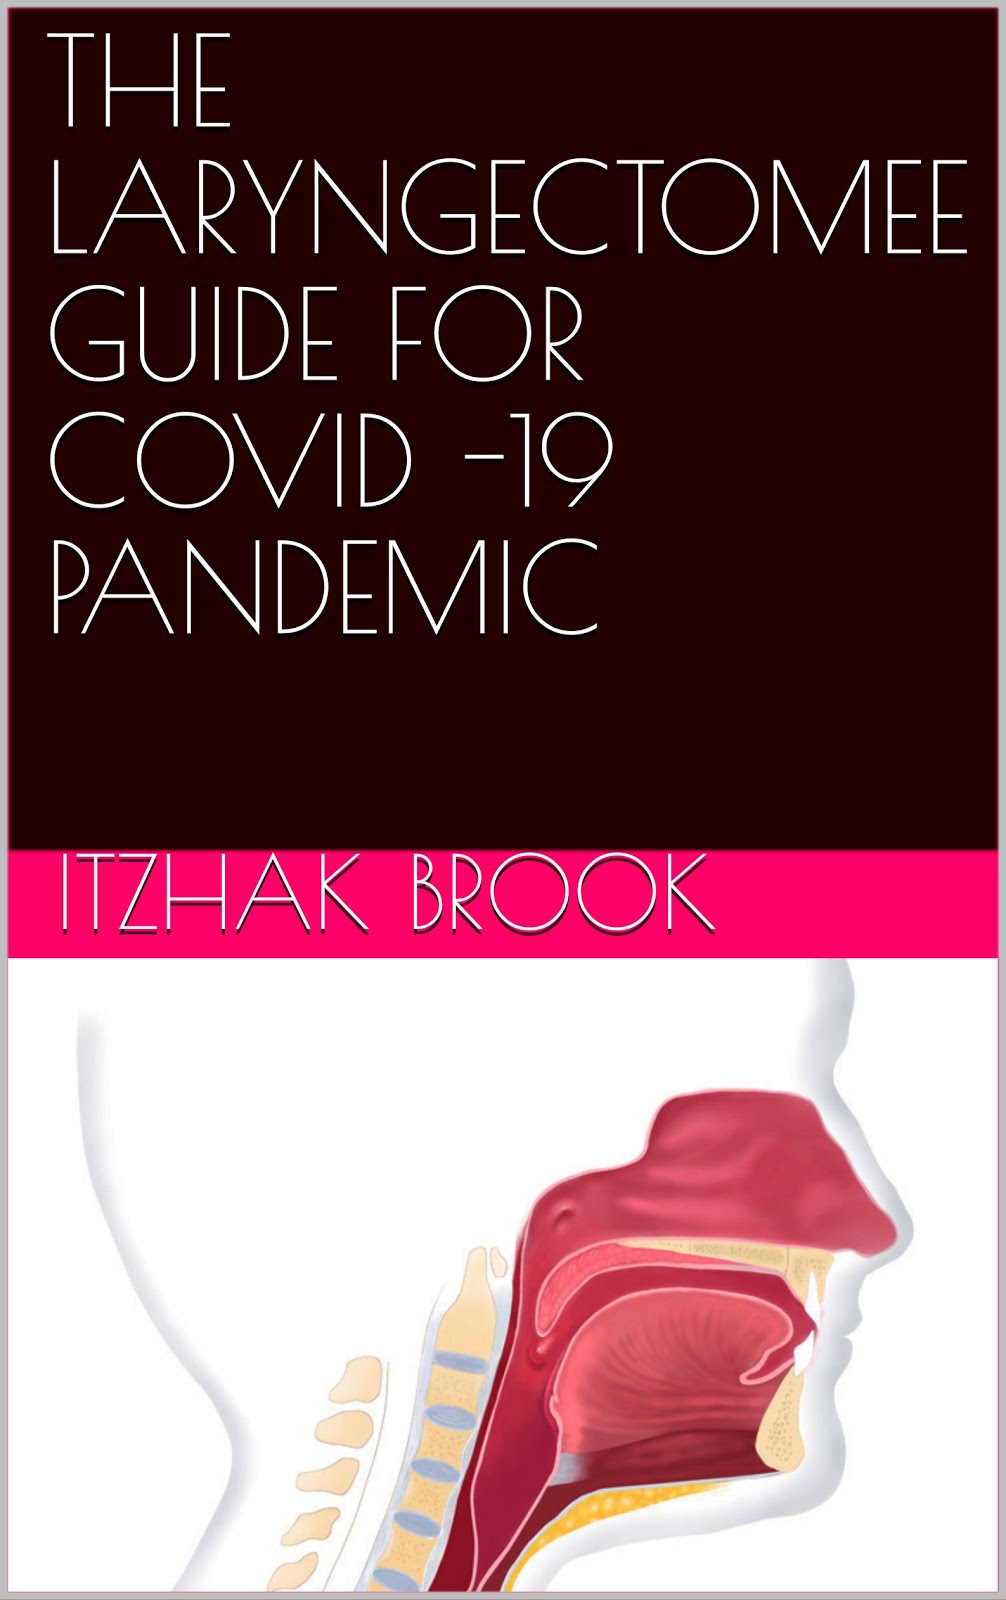 Dr Brook's " book "Laryngectomee Guide for COVID -19 Pandemic